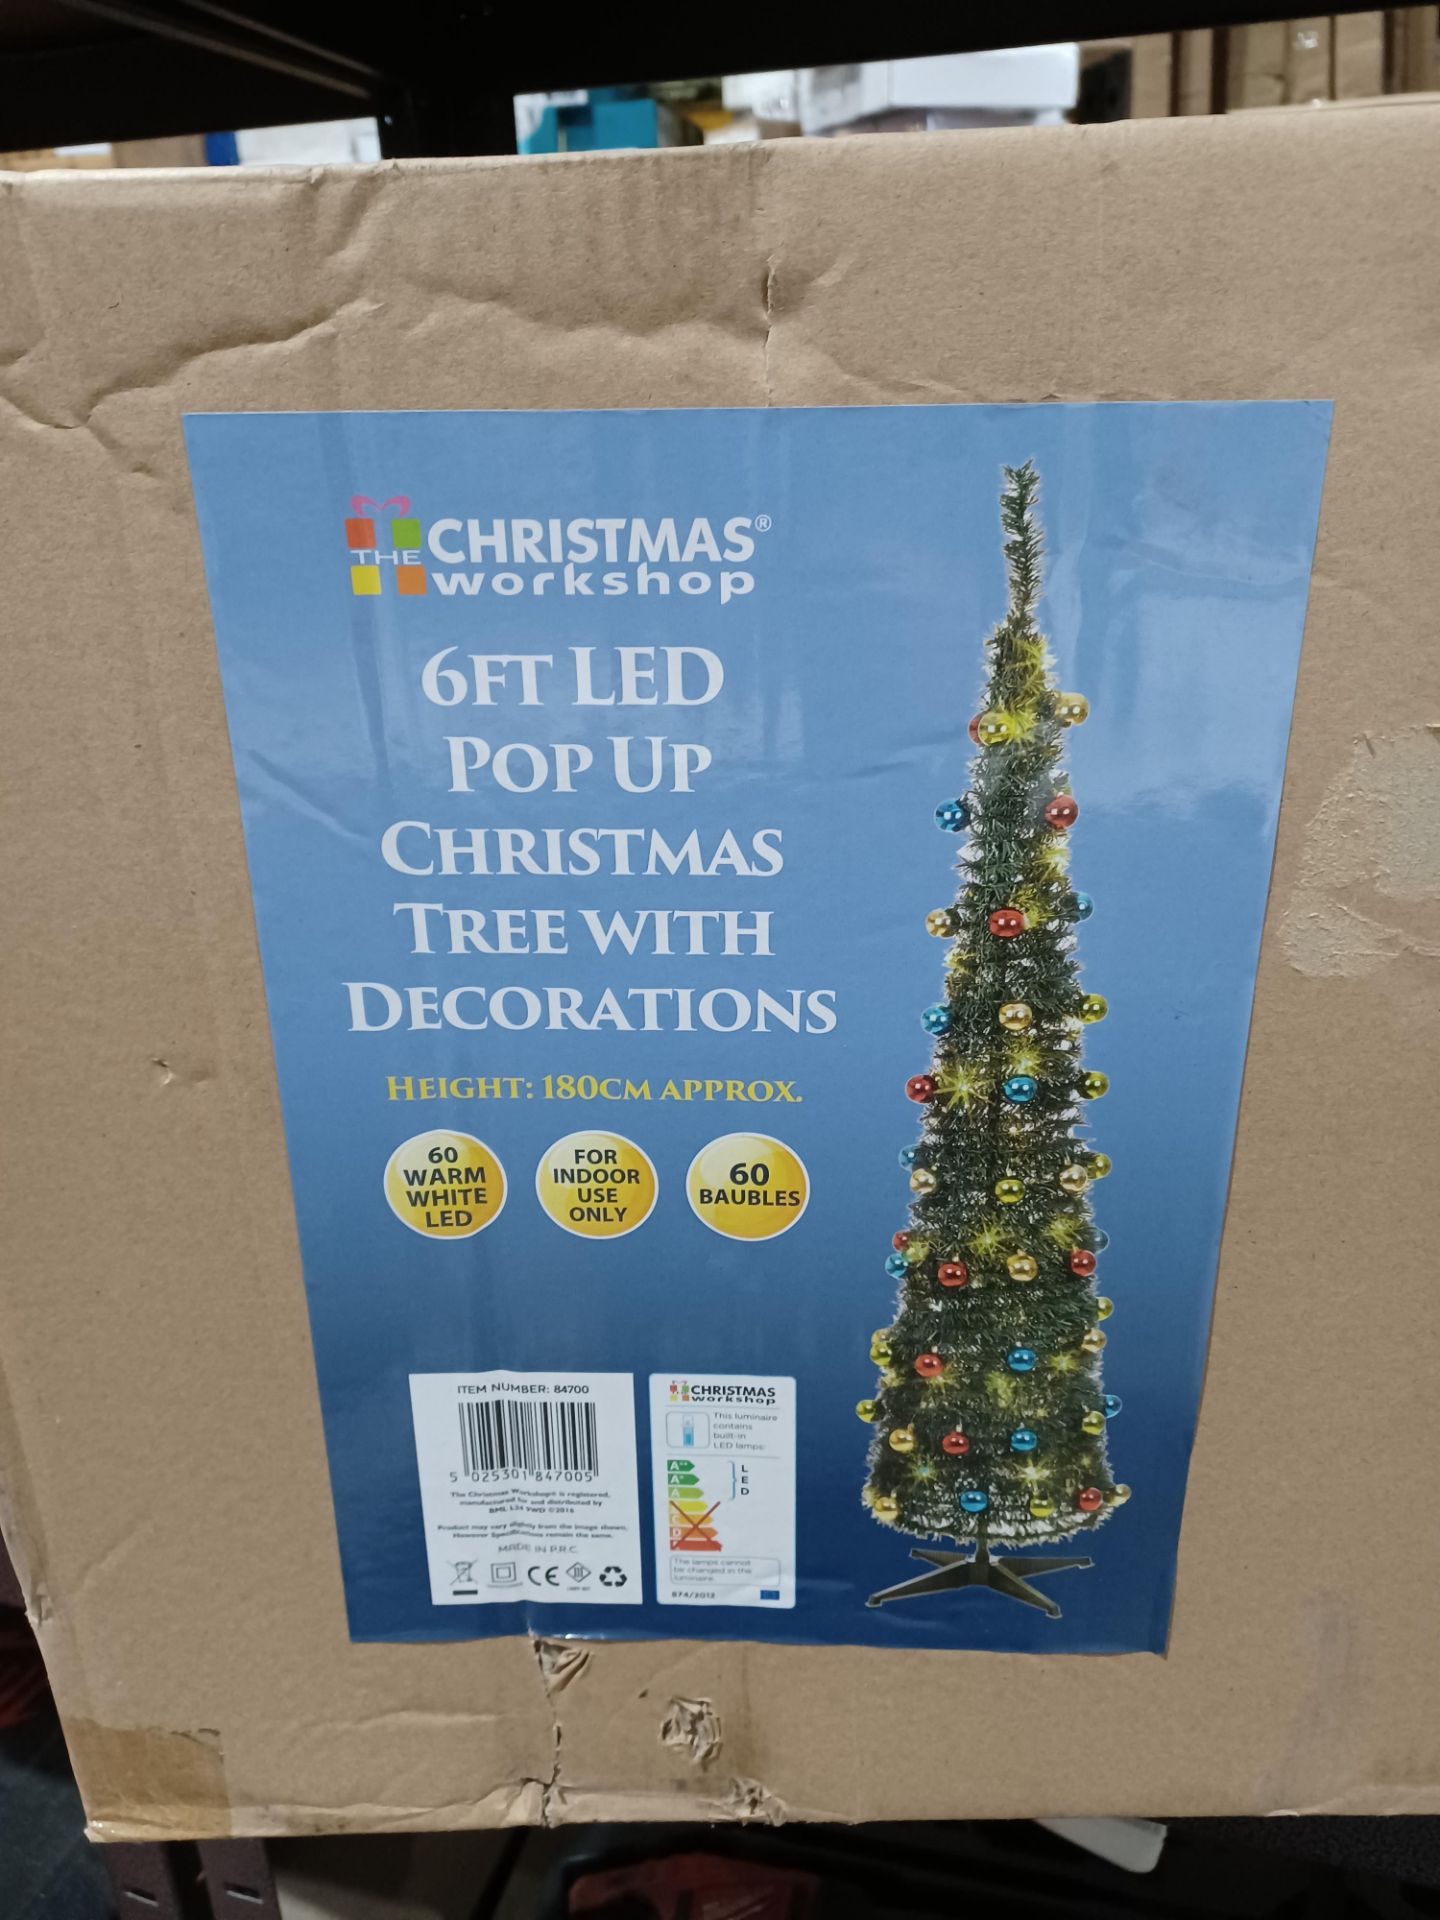 2 X NEW BOXED 6FT LED POP UP CHRISTMAS TREE WITH DECORATIONS 60 WARM WHITE LEDS RRP £44.95 EACH